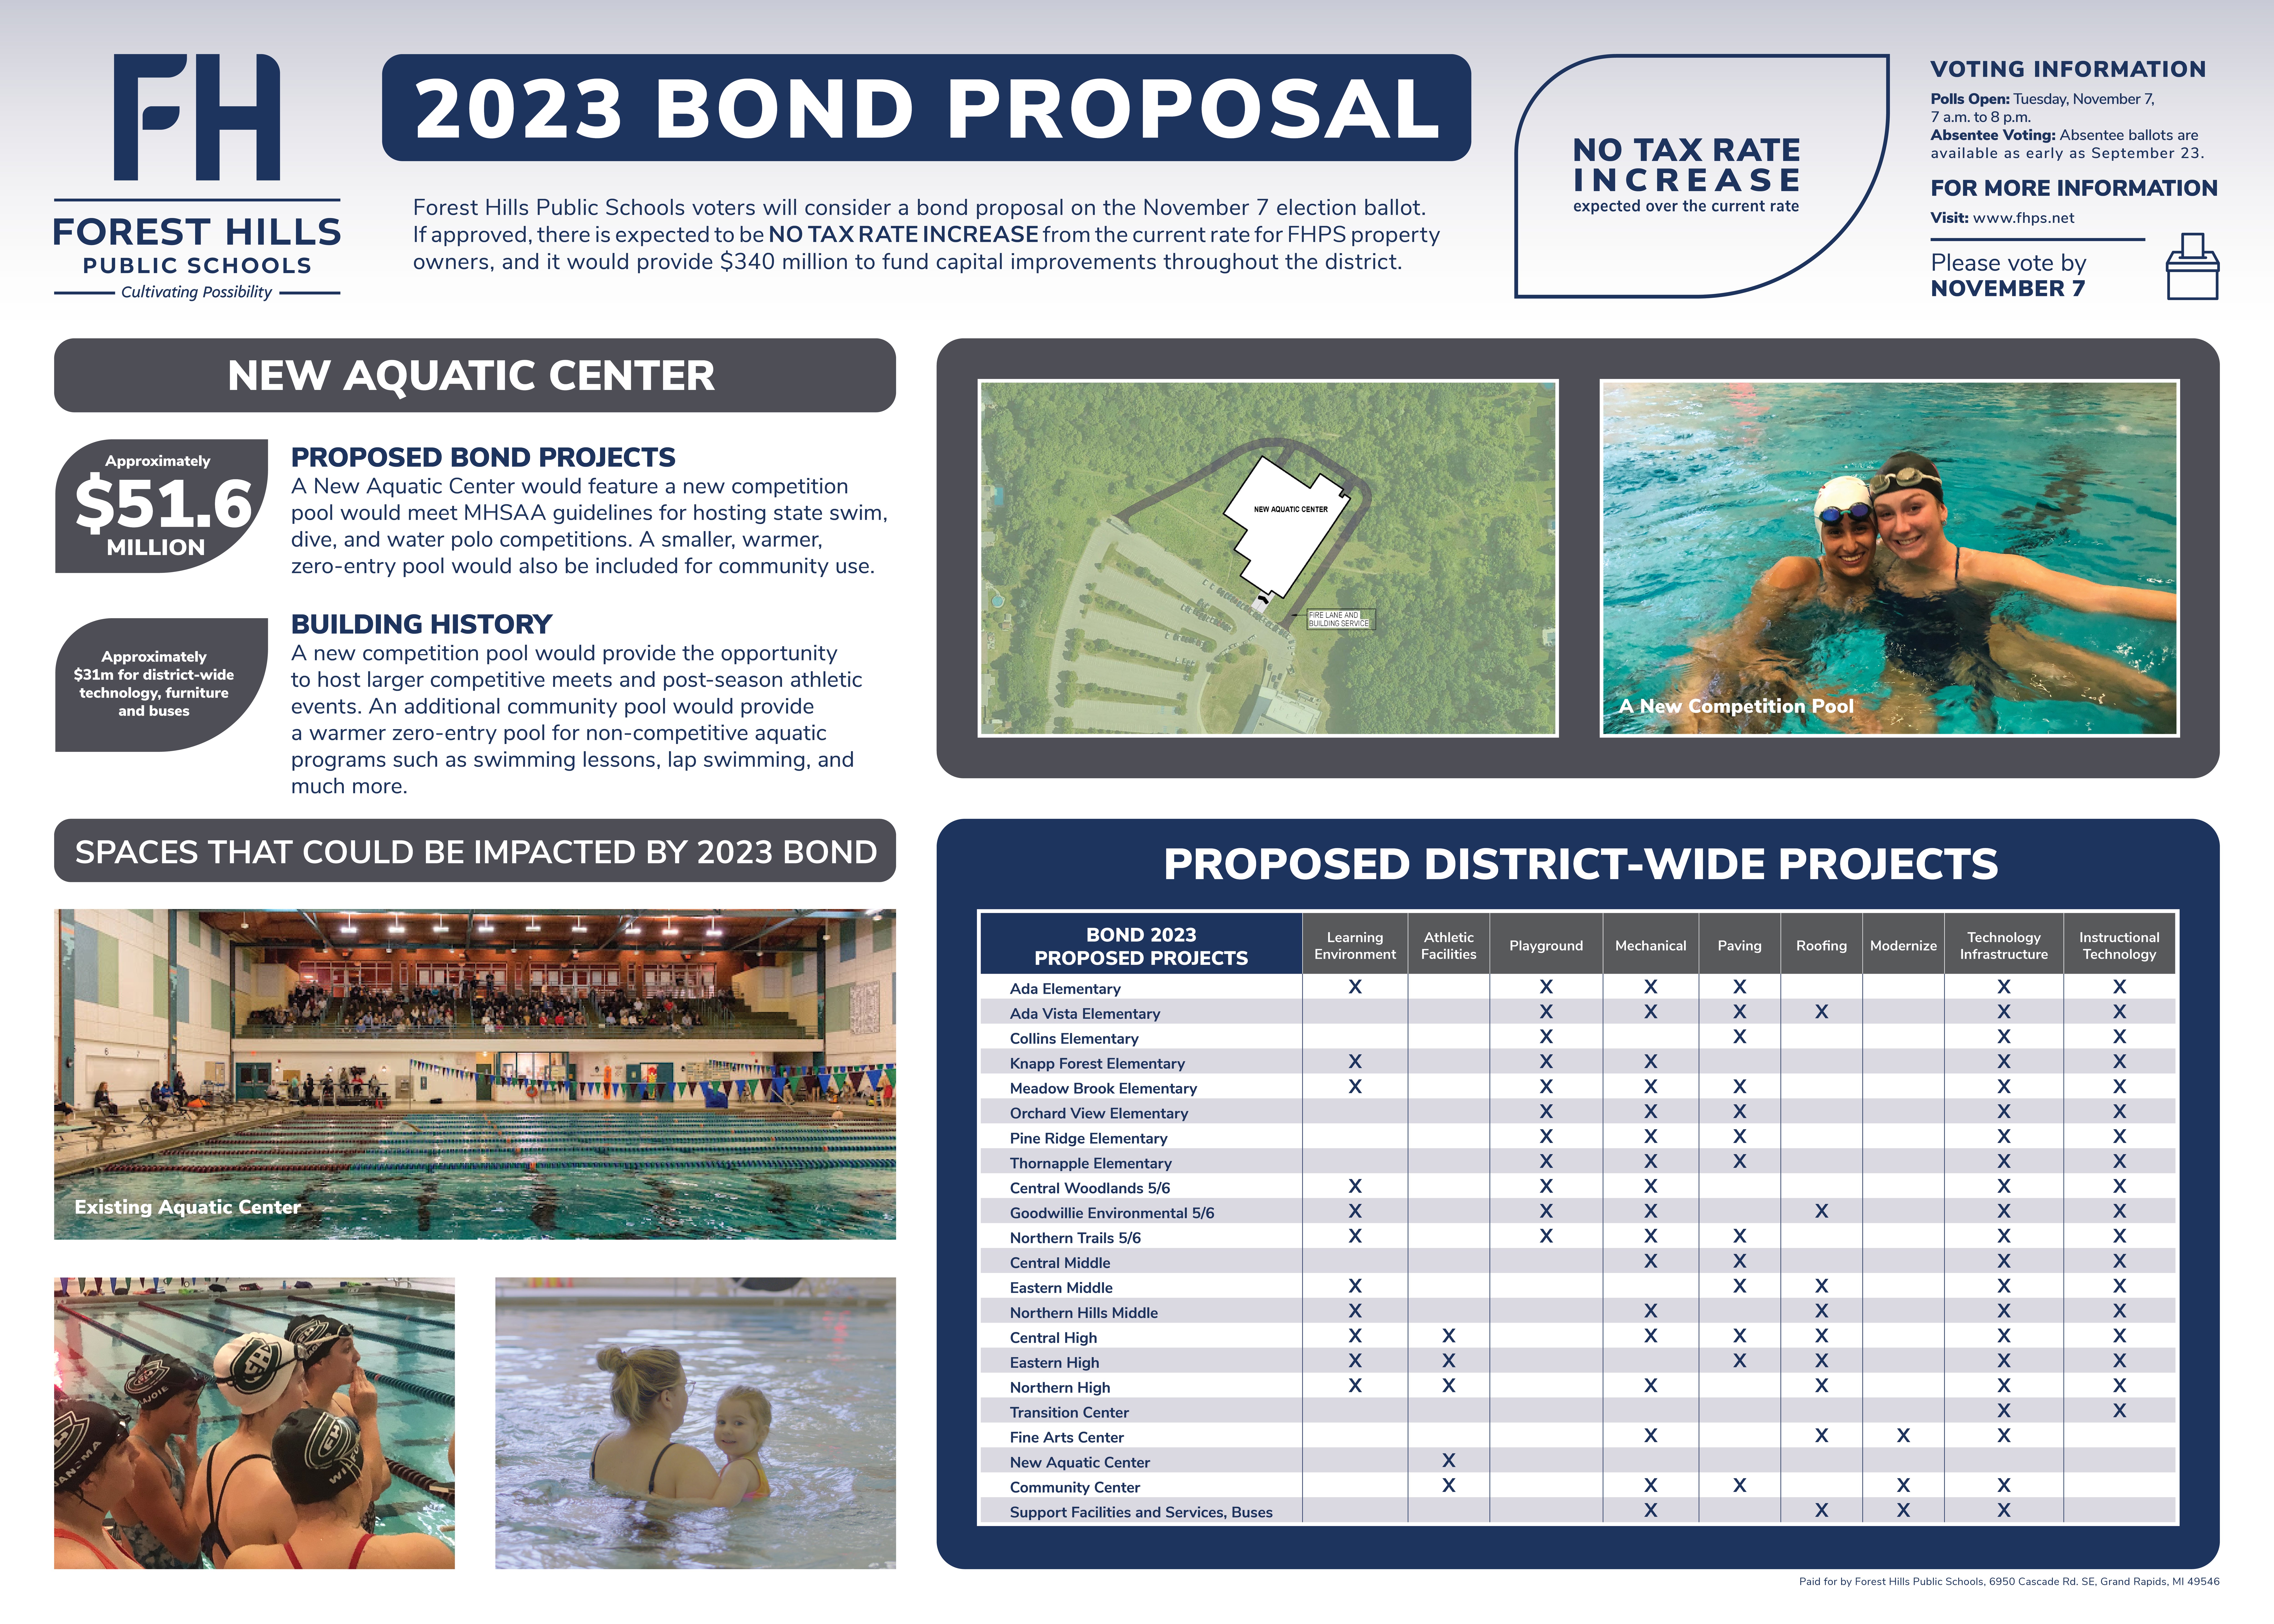 Aquatic center pictures and spaces that could be impacted by the 2023 bond.